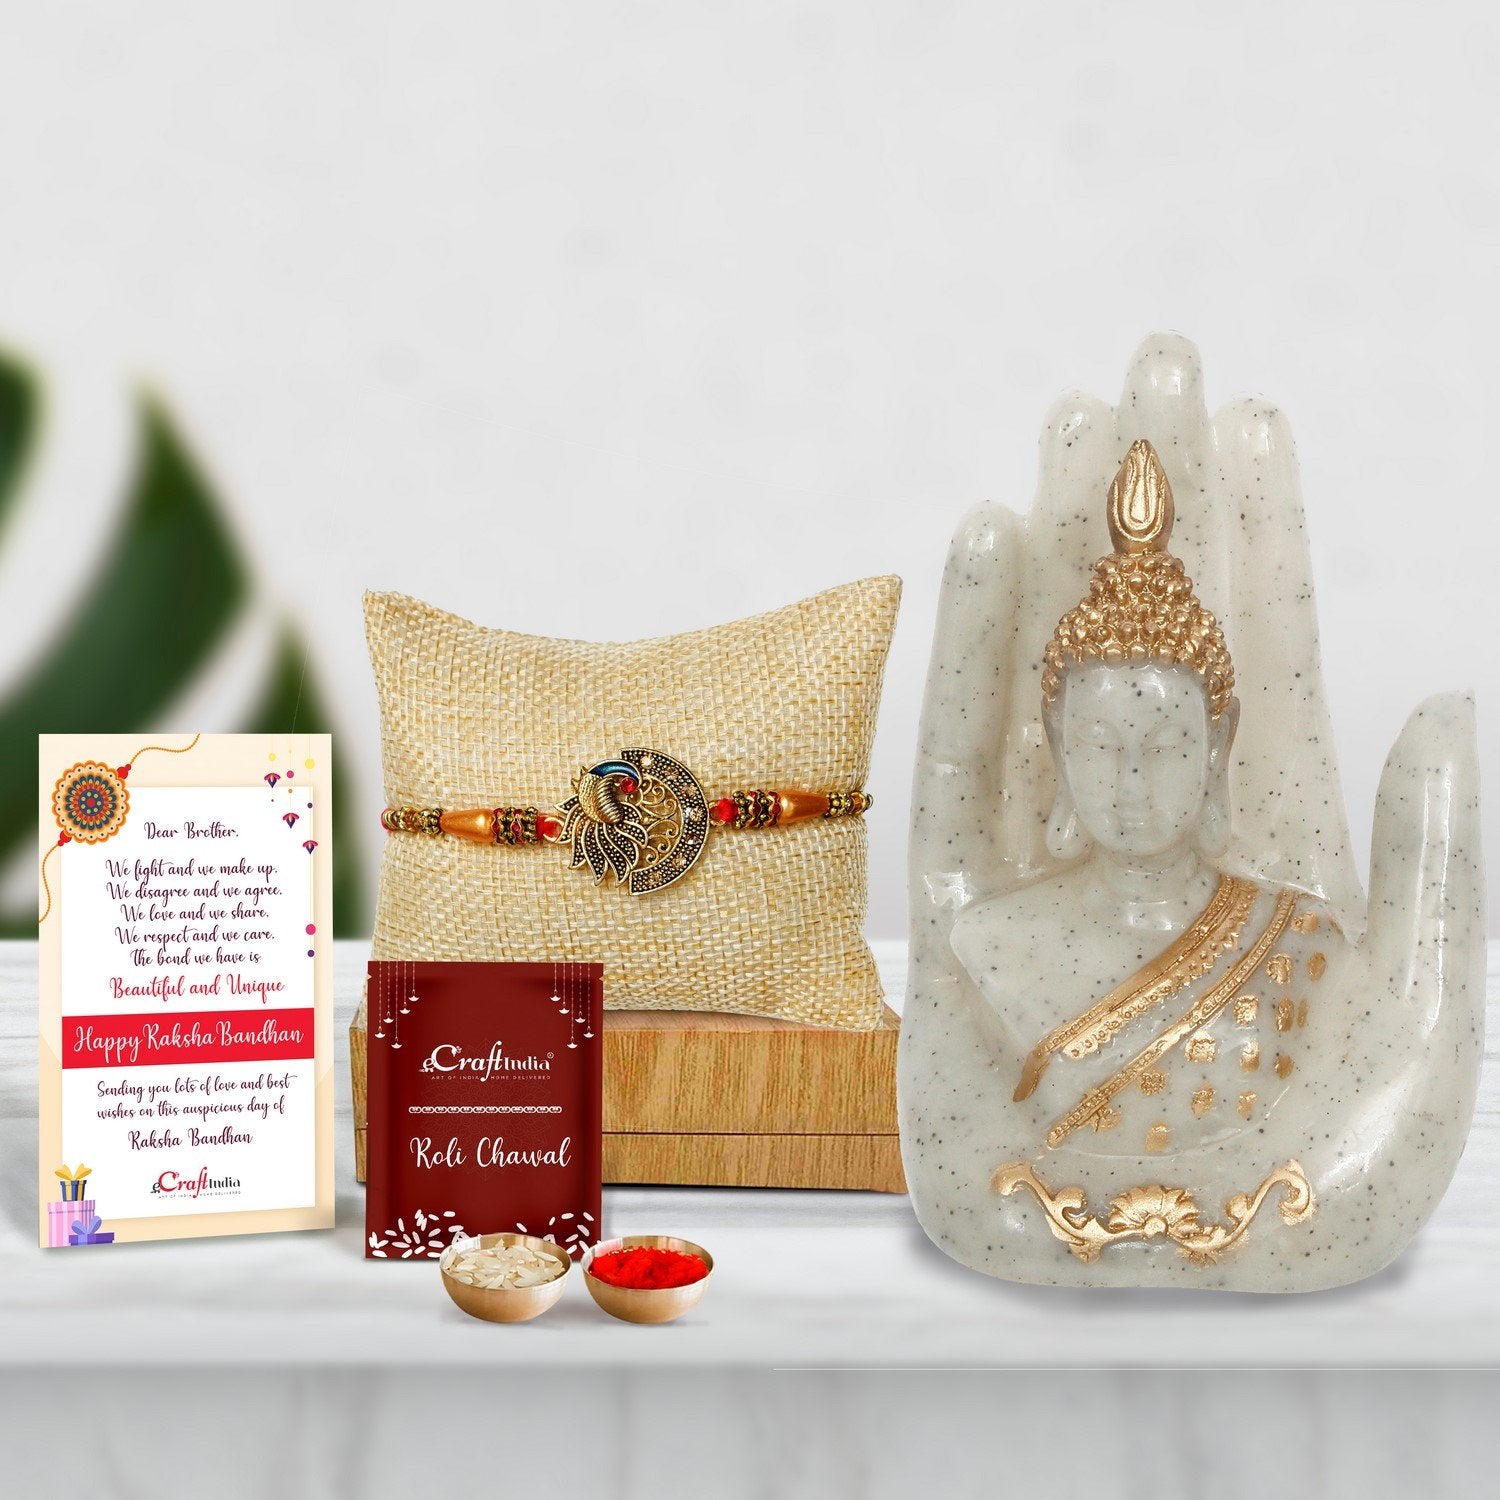 Designer Peacock Rakhi with Golden Silver Handcrafted Palm Buddha Showpiece and Roli Chawal Pack, Best Wishes Greeting Card